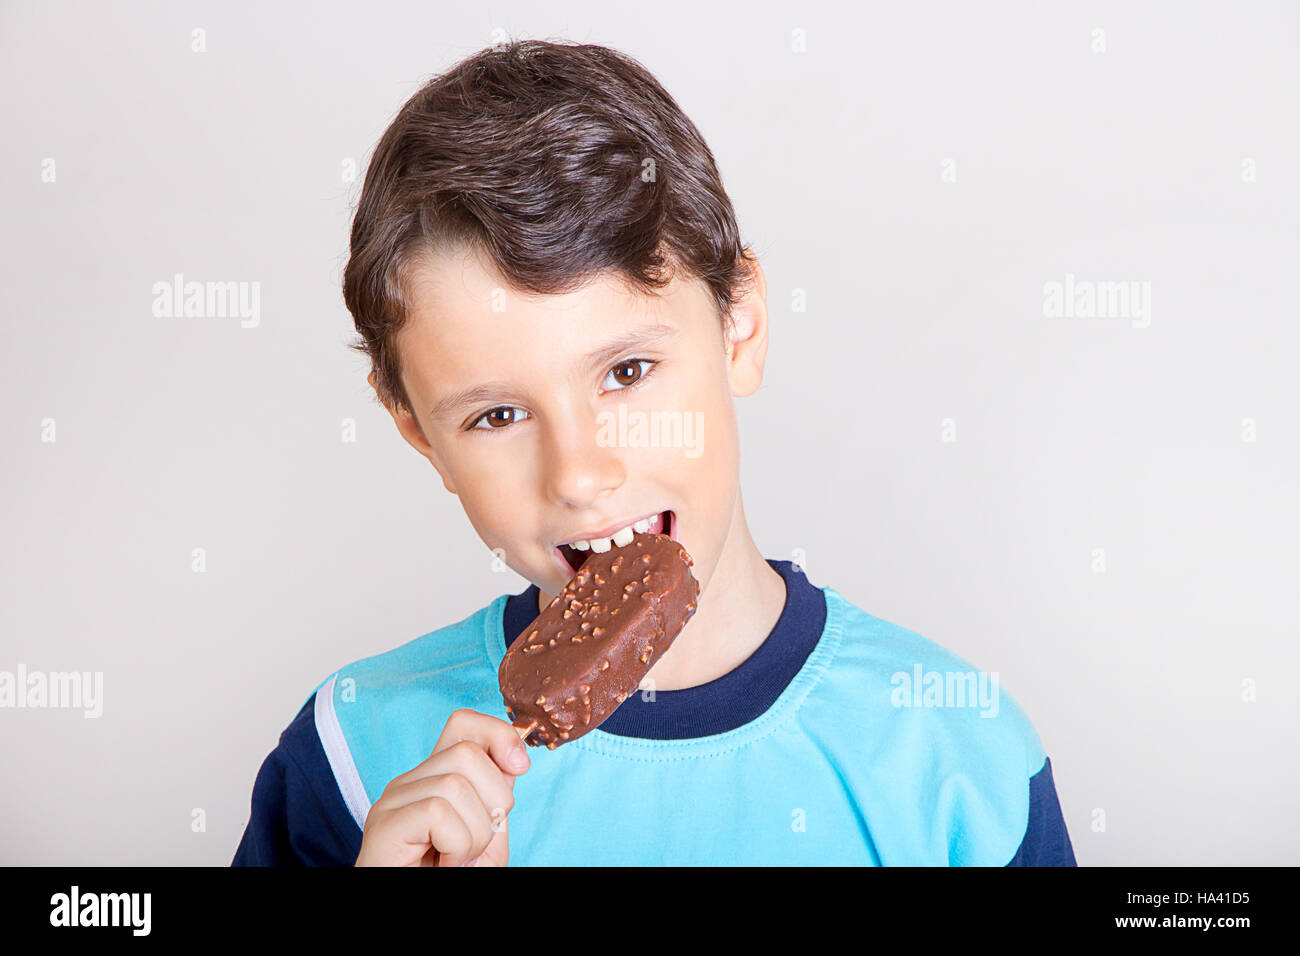 Young kid feeling happy while eating chocolate ice cream bar Stock Photo